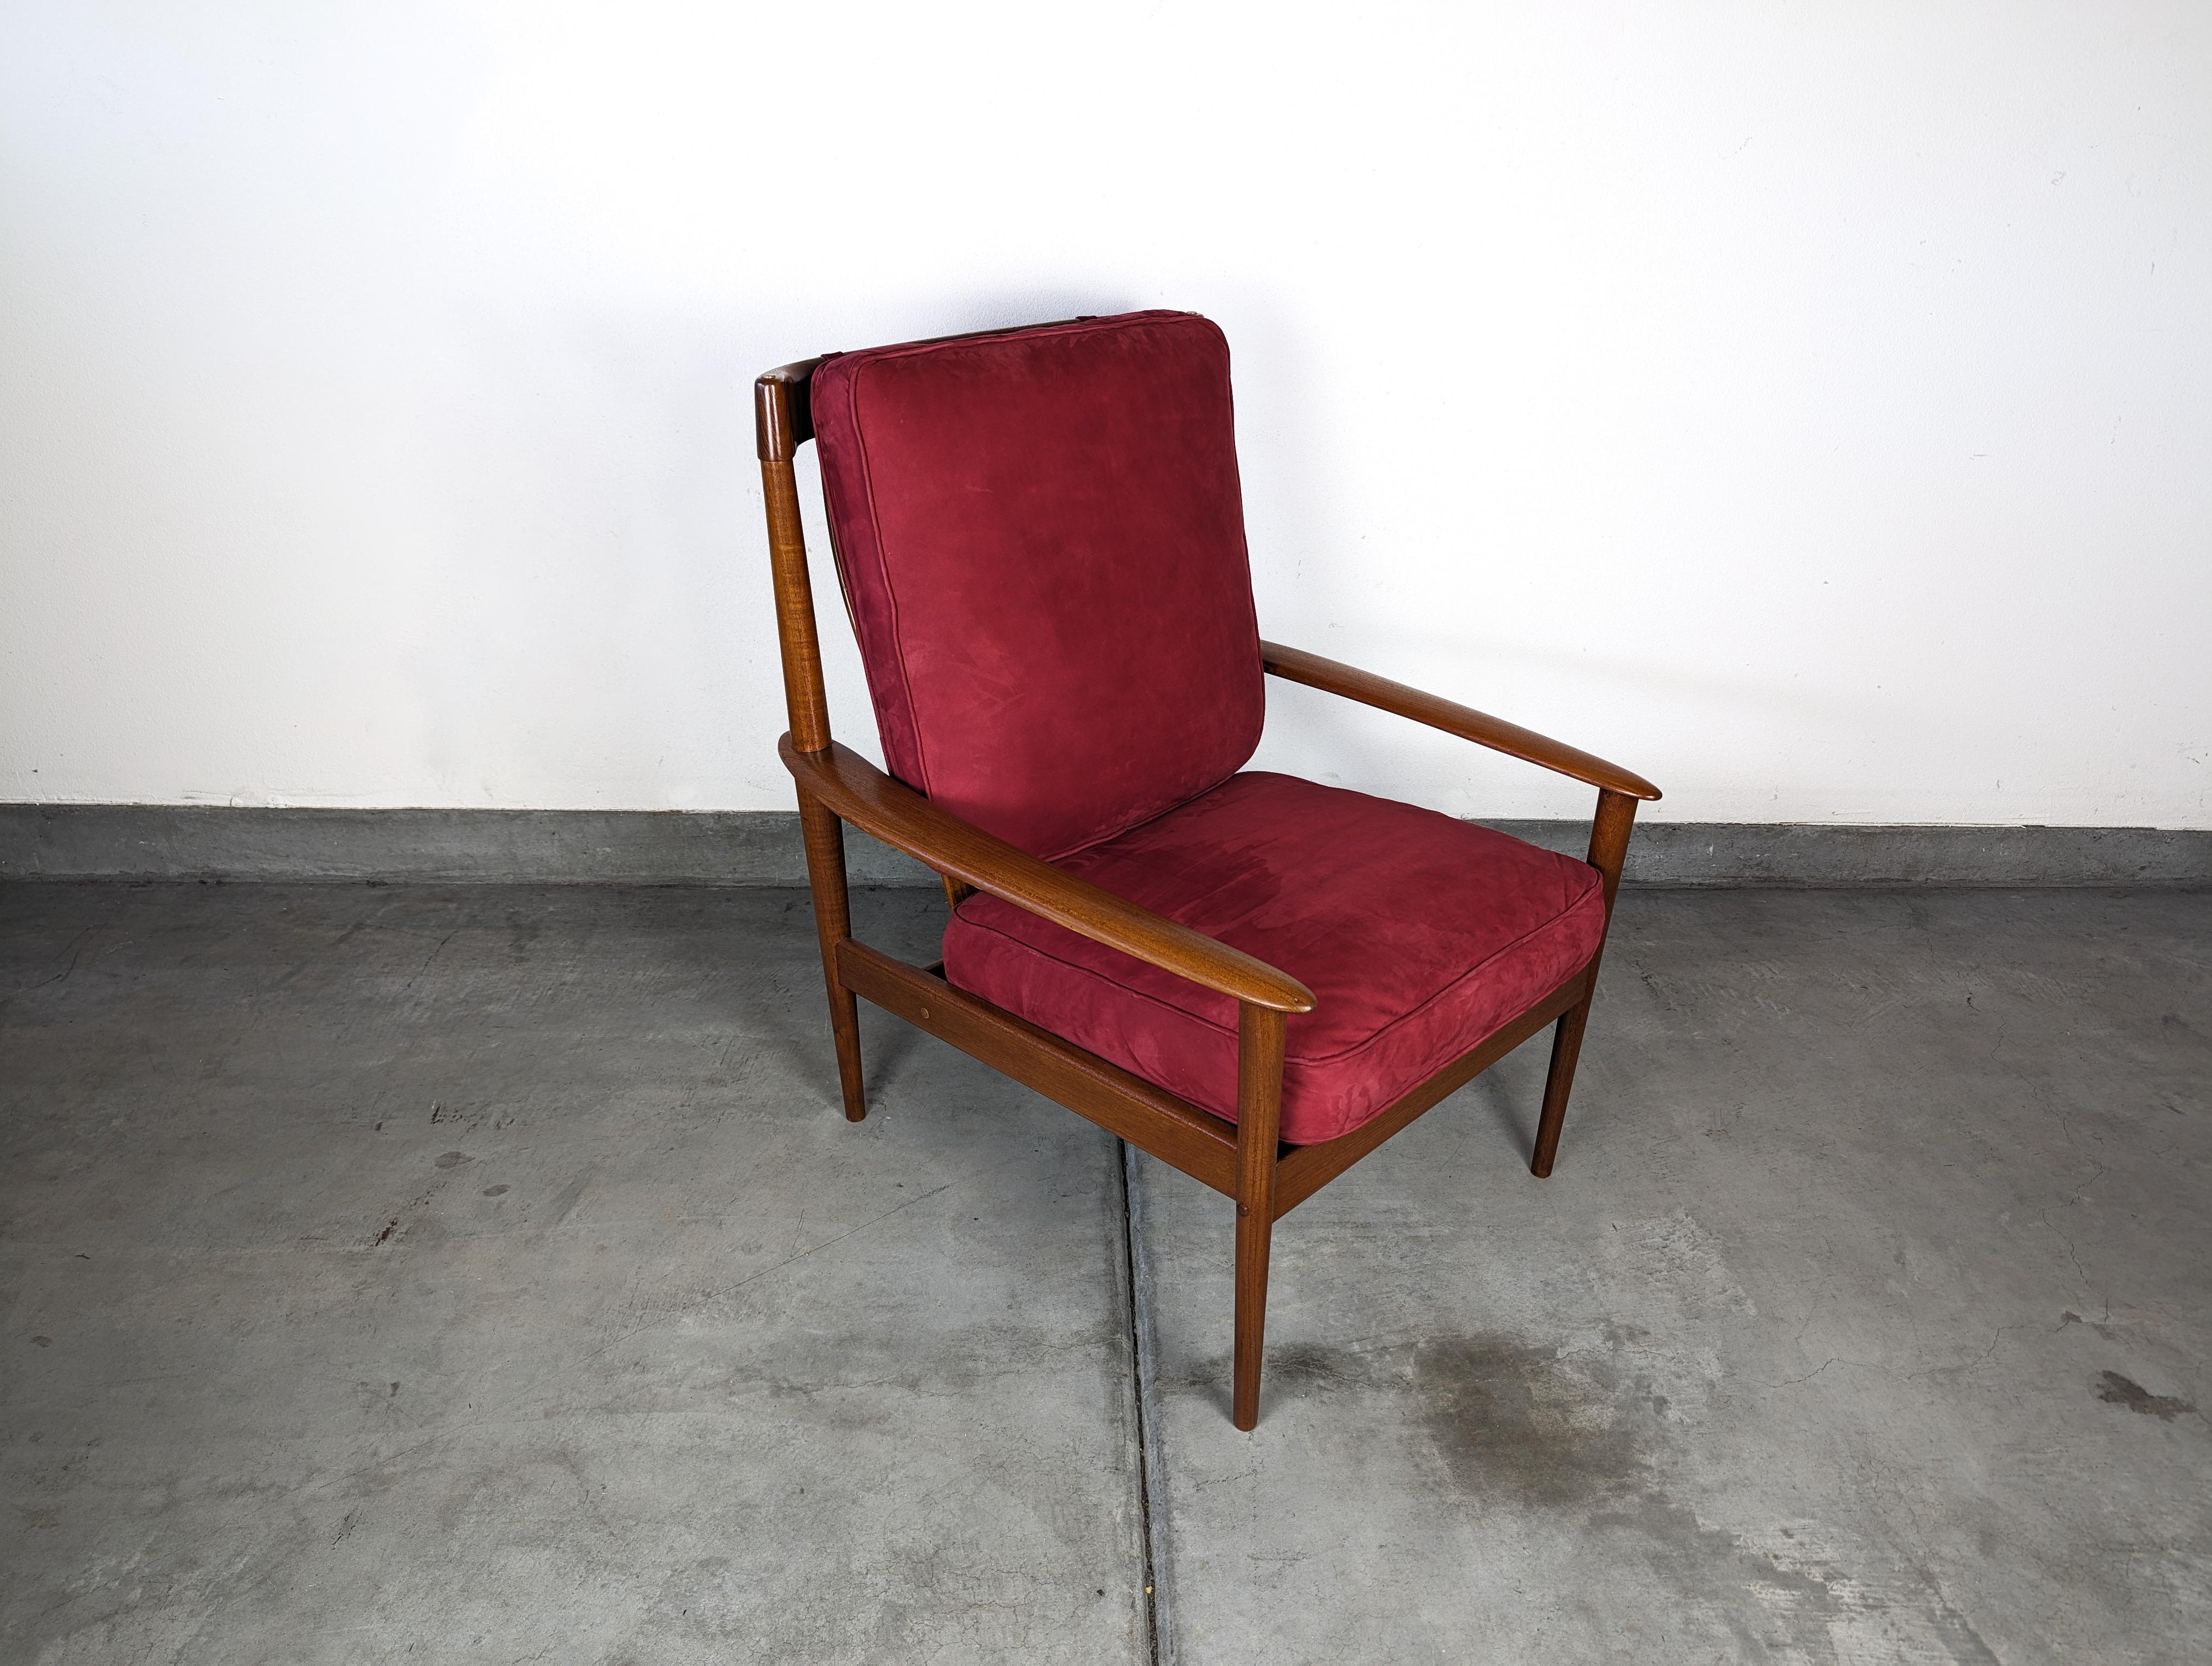 Mid-Century Modern Lounge Chair by Grete Jalk, PJ56 Highback Model, c1960s For Sale 4